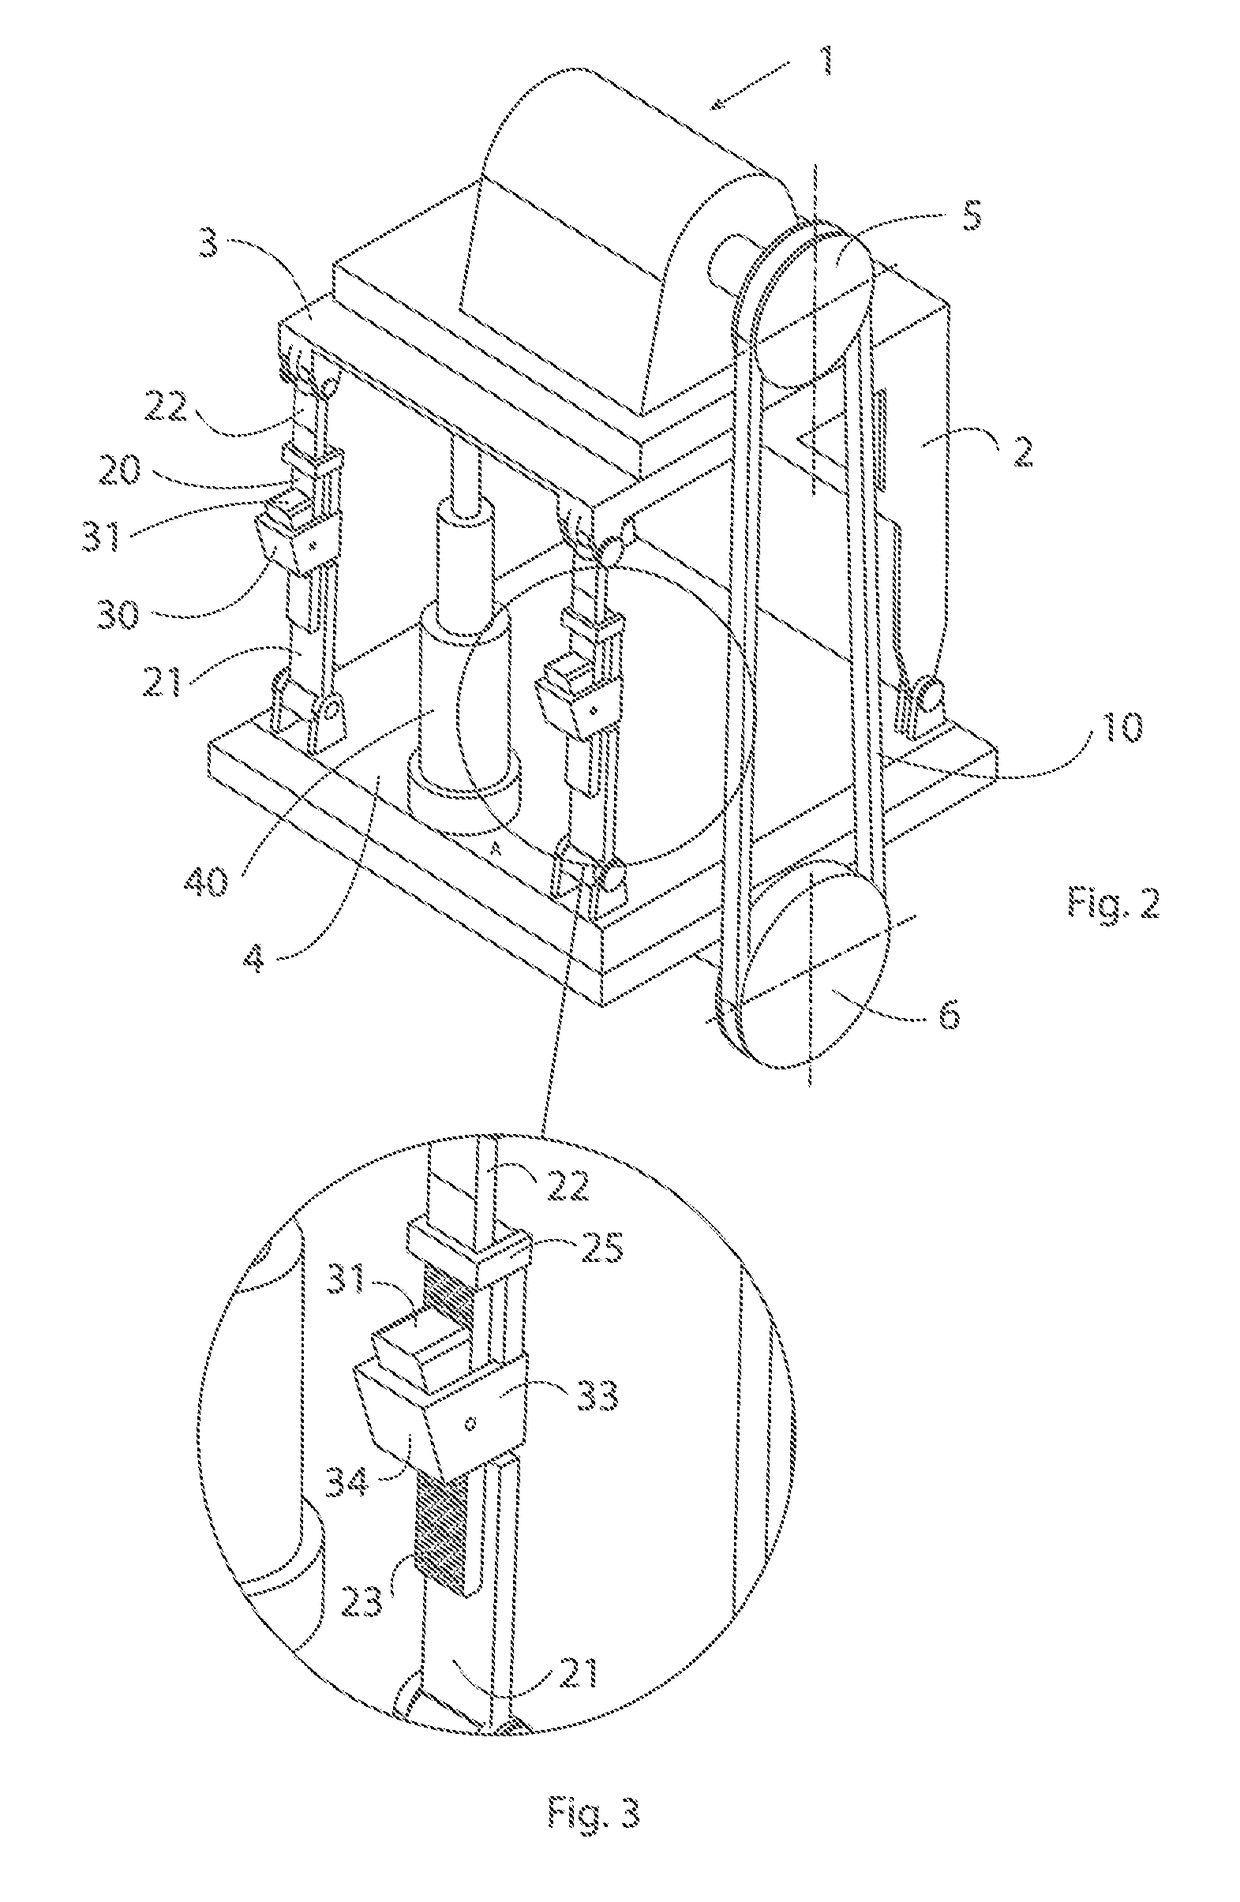 A device for locking a belt at predetermined belt tension